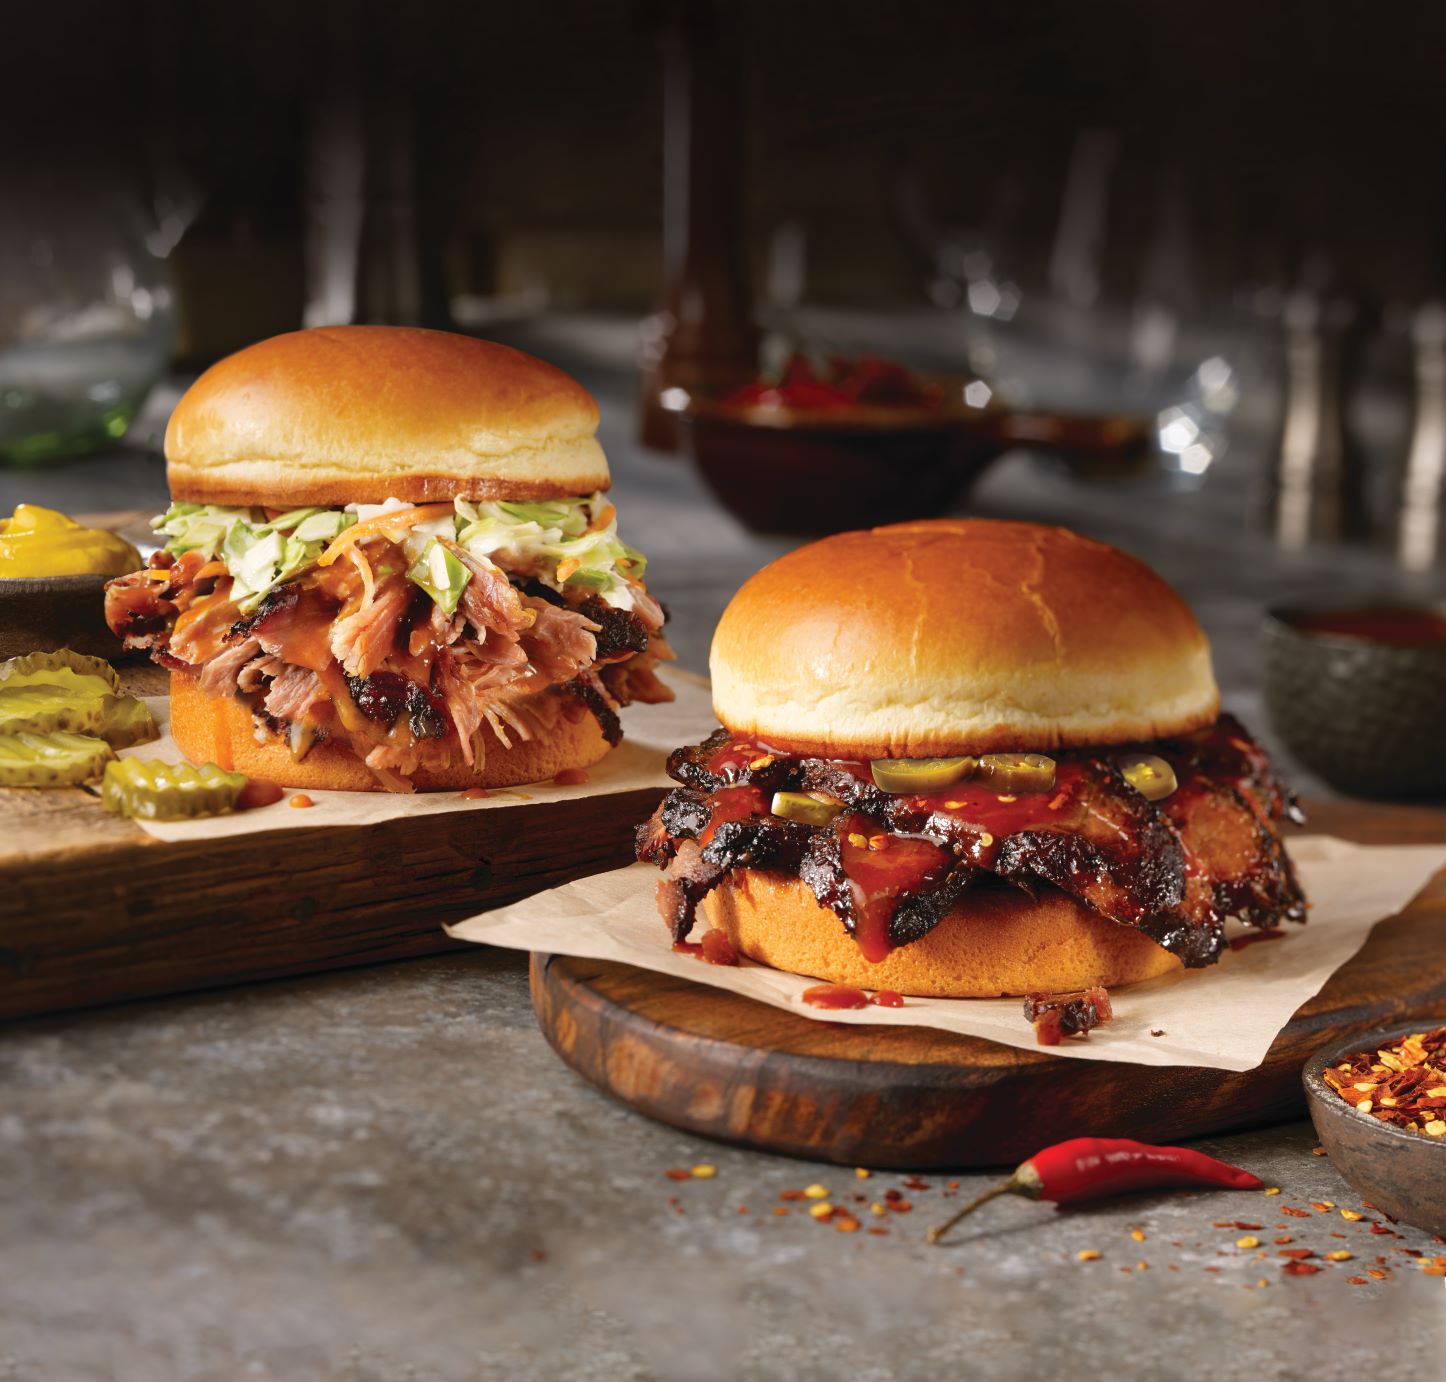 Dickey’s new Texas Hot Brisket Sandwich is loaded with Texas-style brisket and topped with Texas hot barbecue sauce and jalapenos in between a warm brioche bun. The Carolina Style Pulled Pork Sandwich is Dickey's sweet and tangy twist on a barbecue staple that includes Dickey’s famous hickory-smoked pulled pork topped with Carolina Barbecue Sauce and cole slaw on a warm brioche bun.